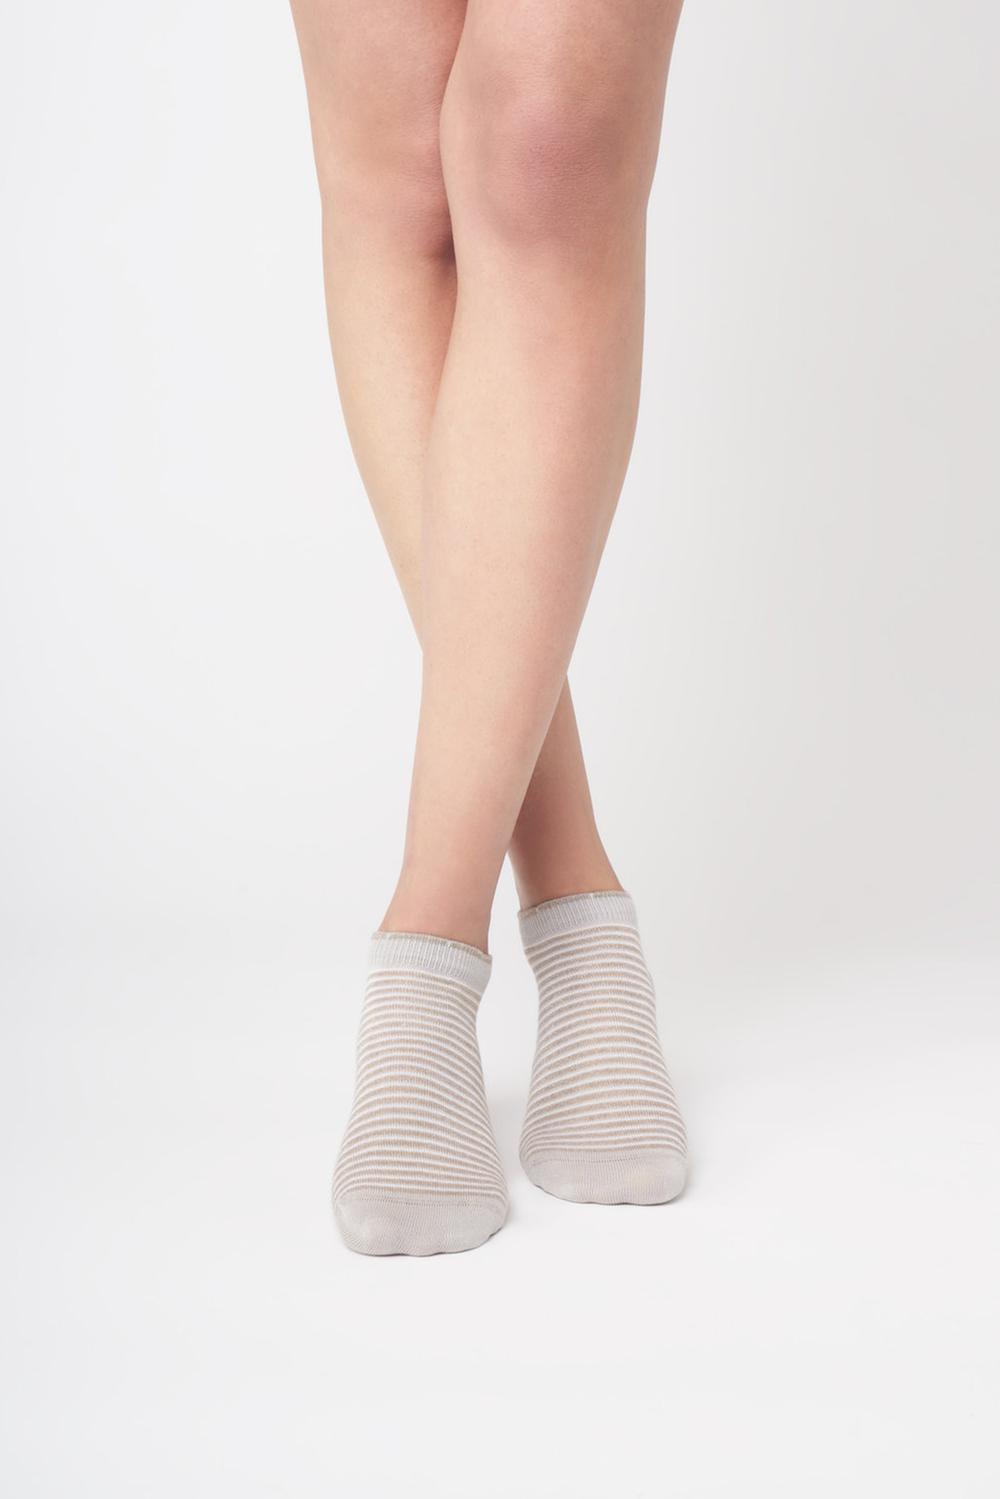 SiSi Righe MiniCalzino - Light grey low ankle cotton mix fashion socks with a stripe pattern in black with gold lurex, shaped heel and flat toe seam.